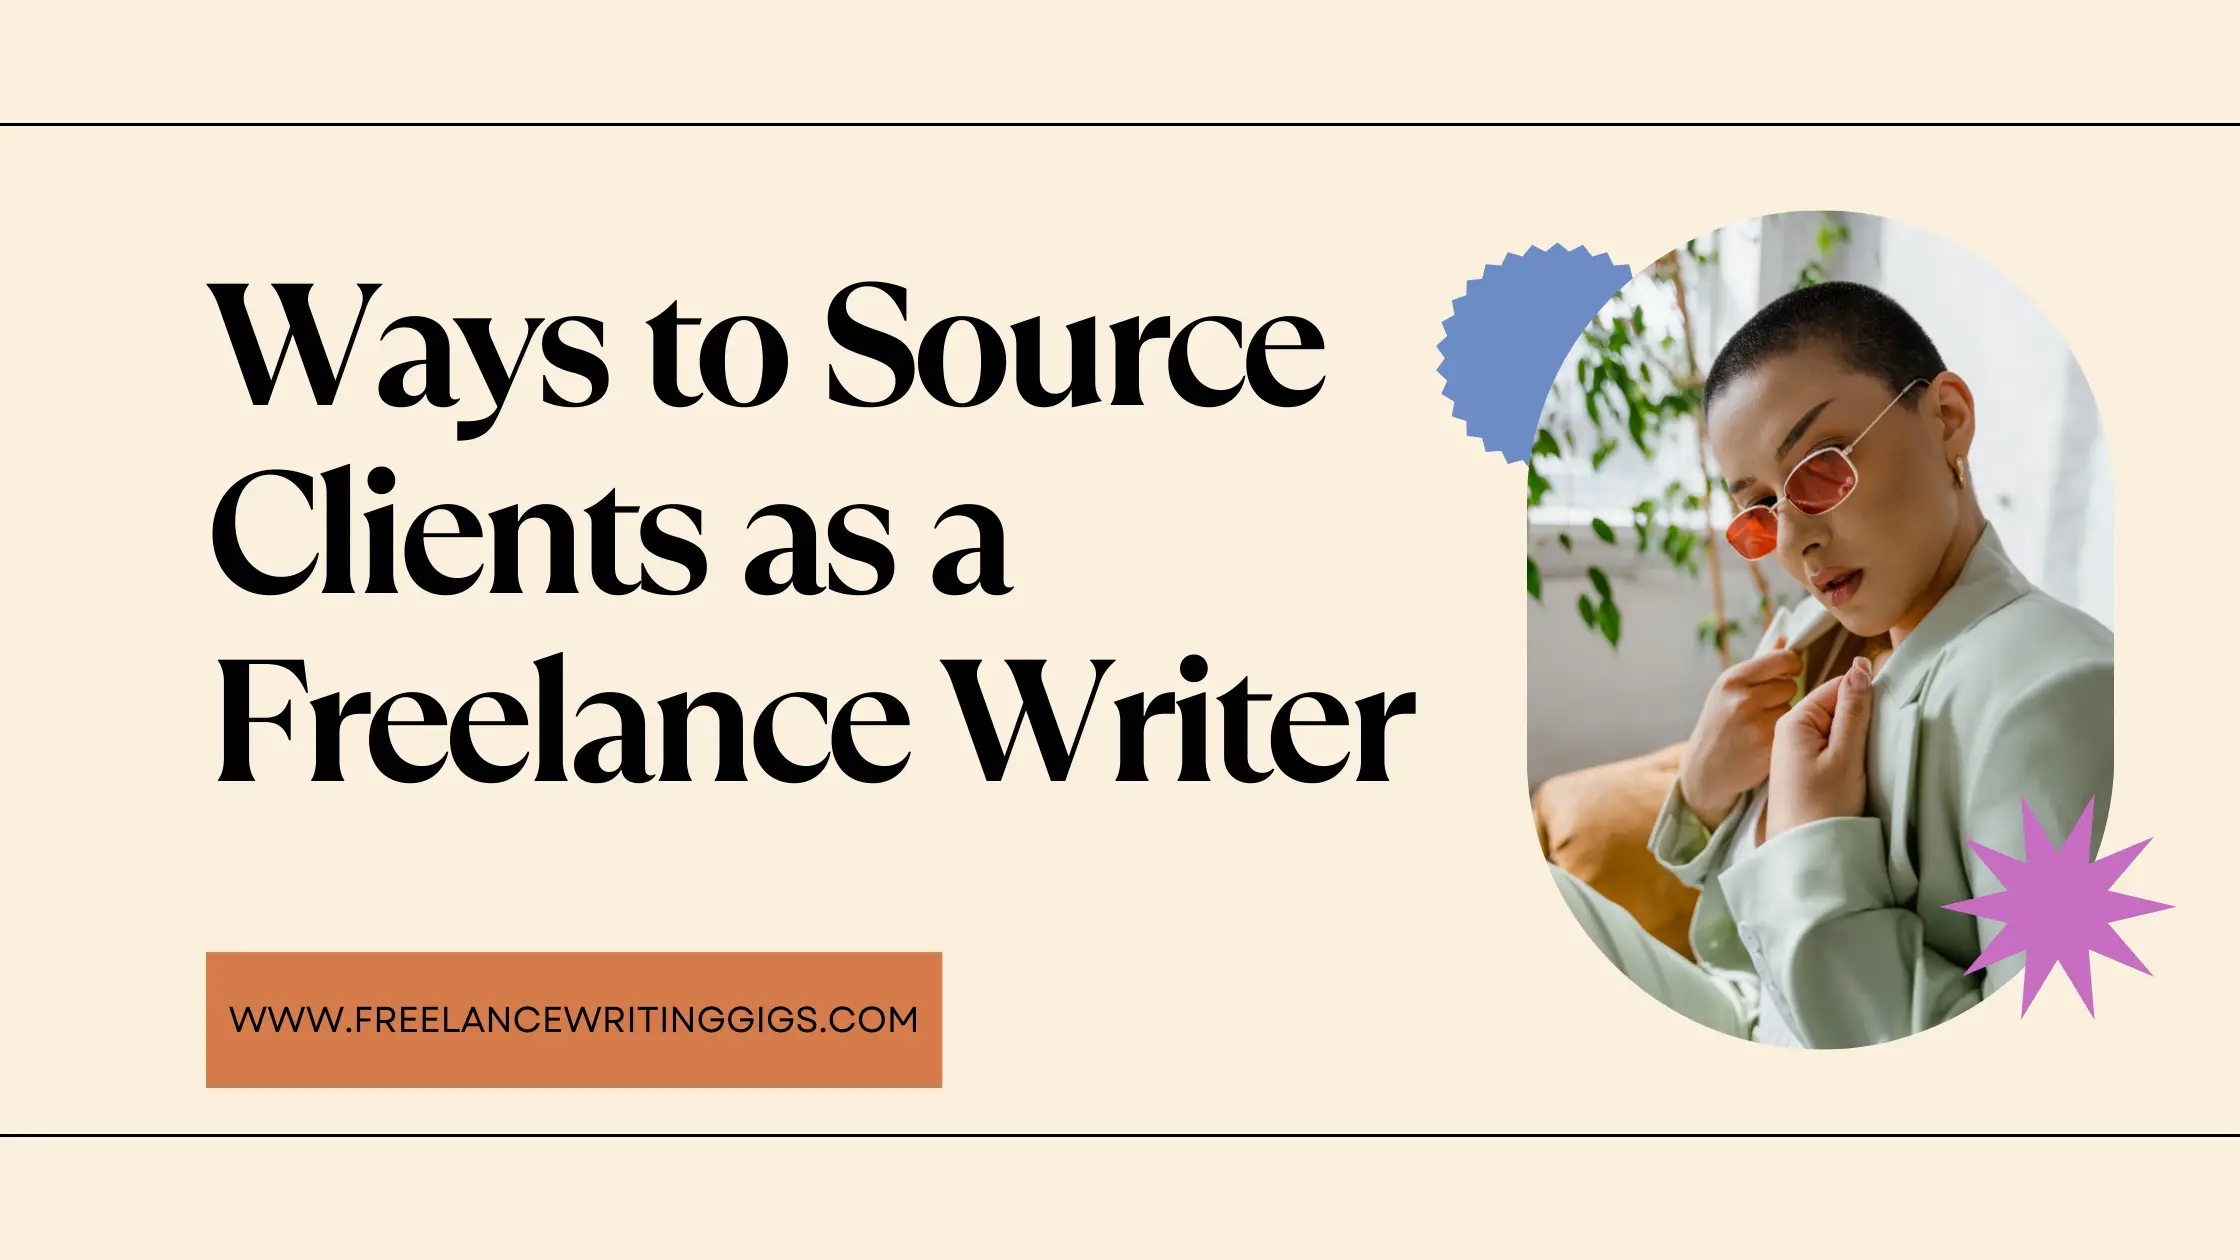 7 Ways to Source Clients as a Freelance Writer